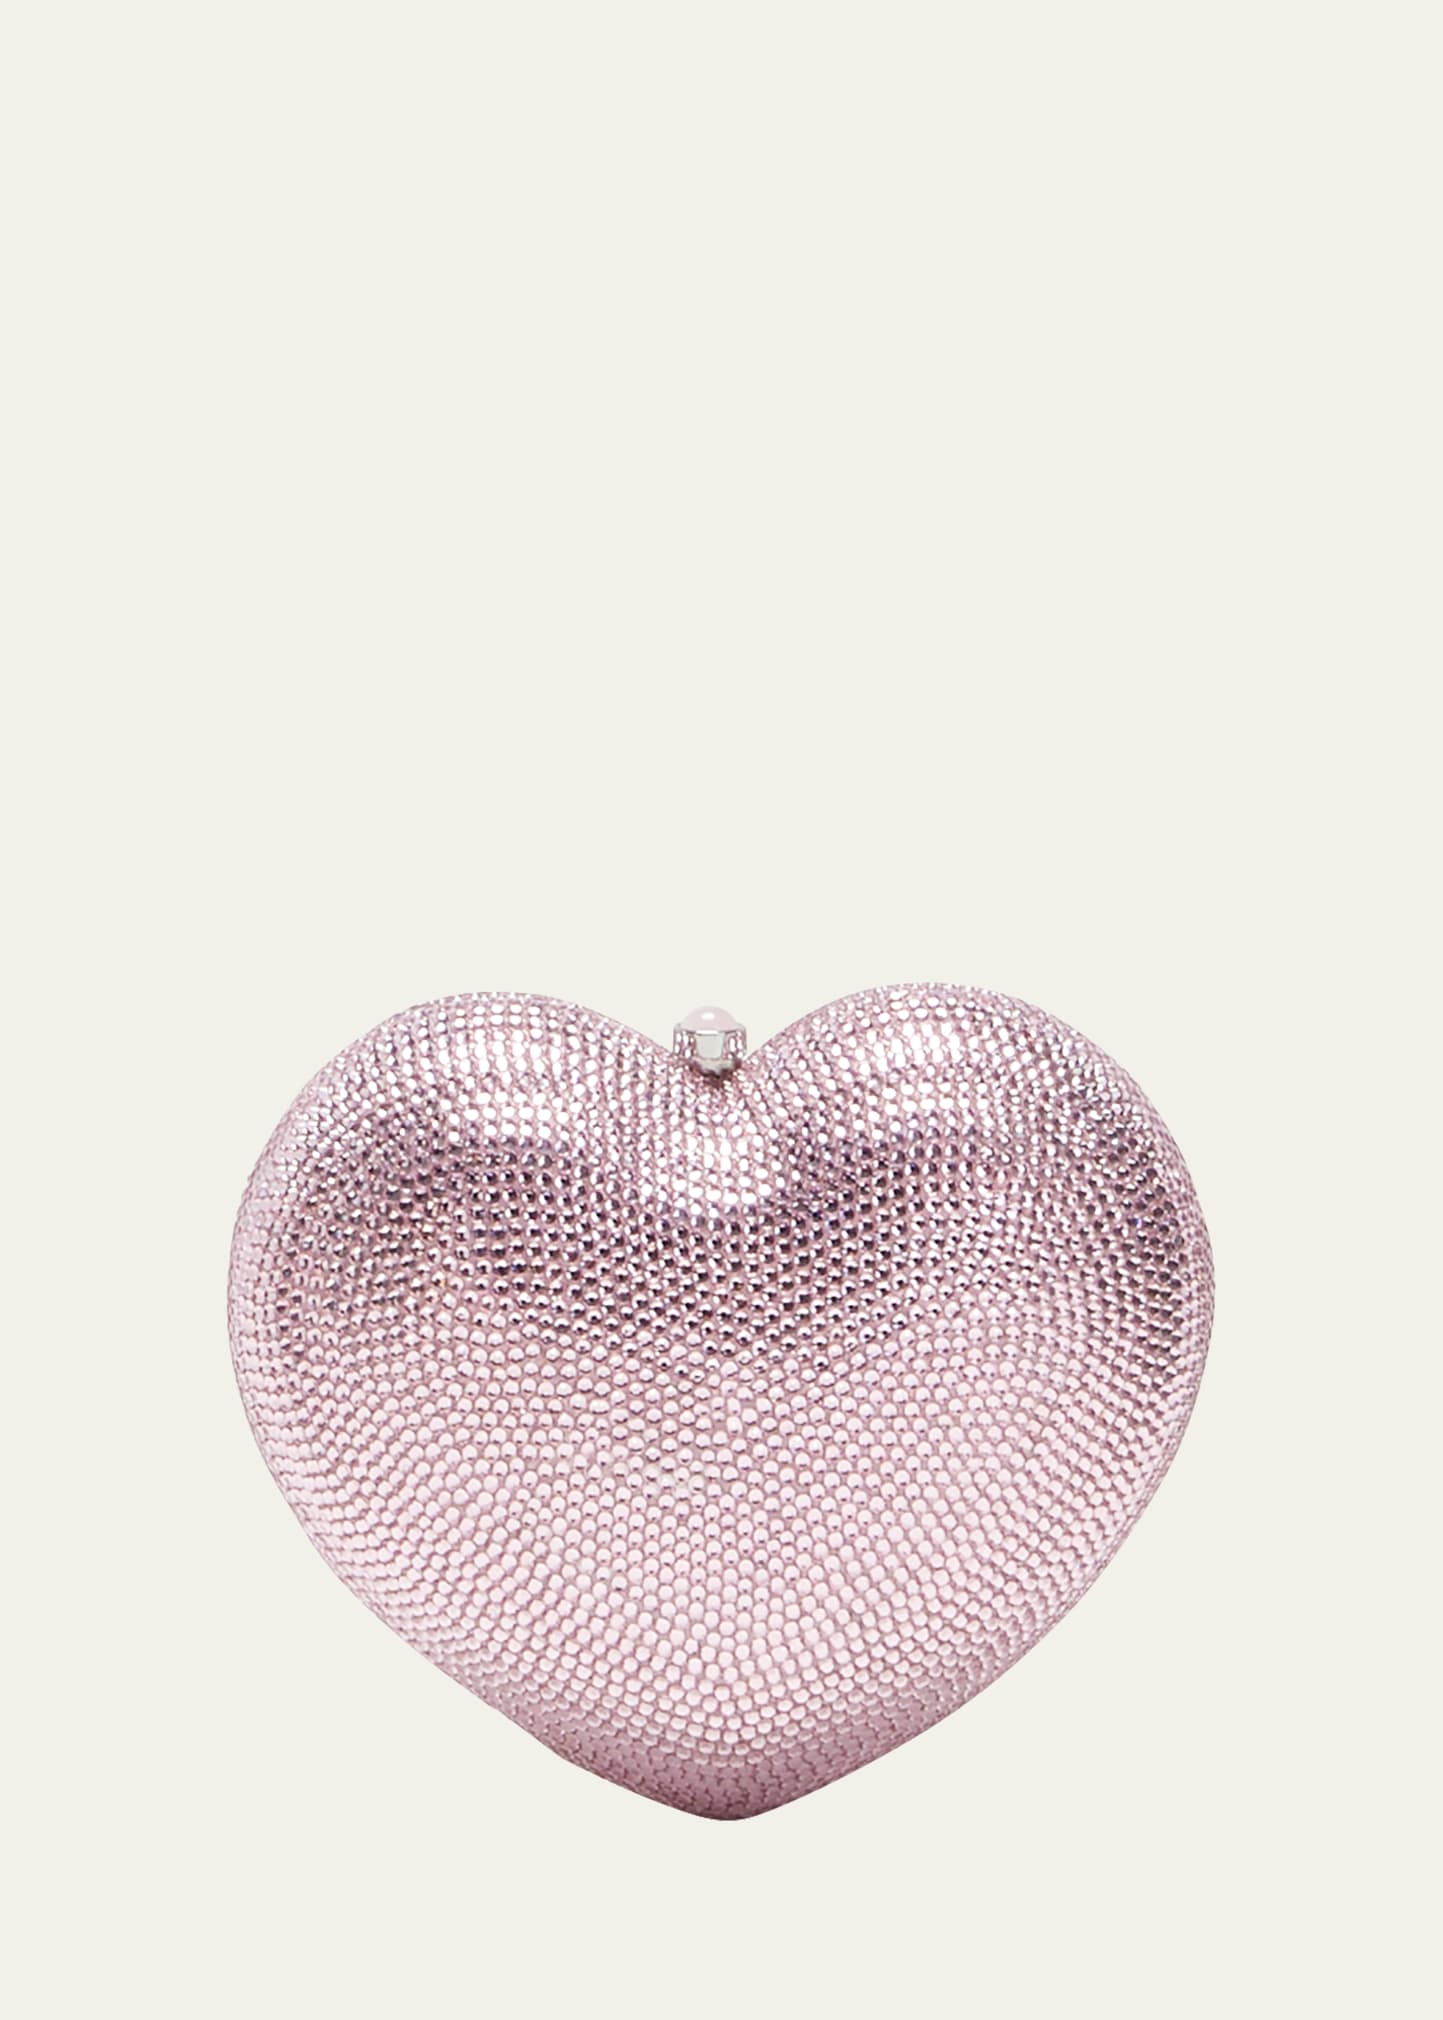 Judith Leiber L'amour Petit Coeur Crystal Minaudiere In Silver Light Rose